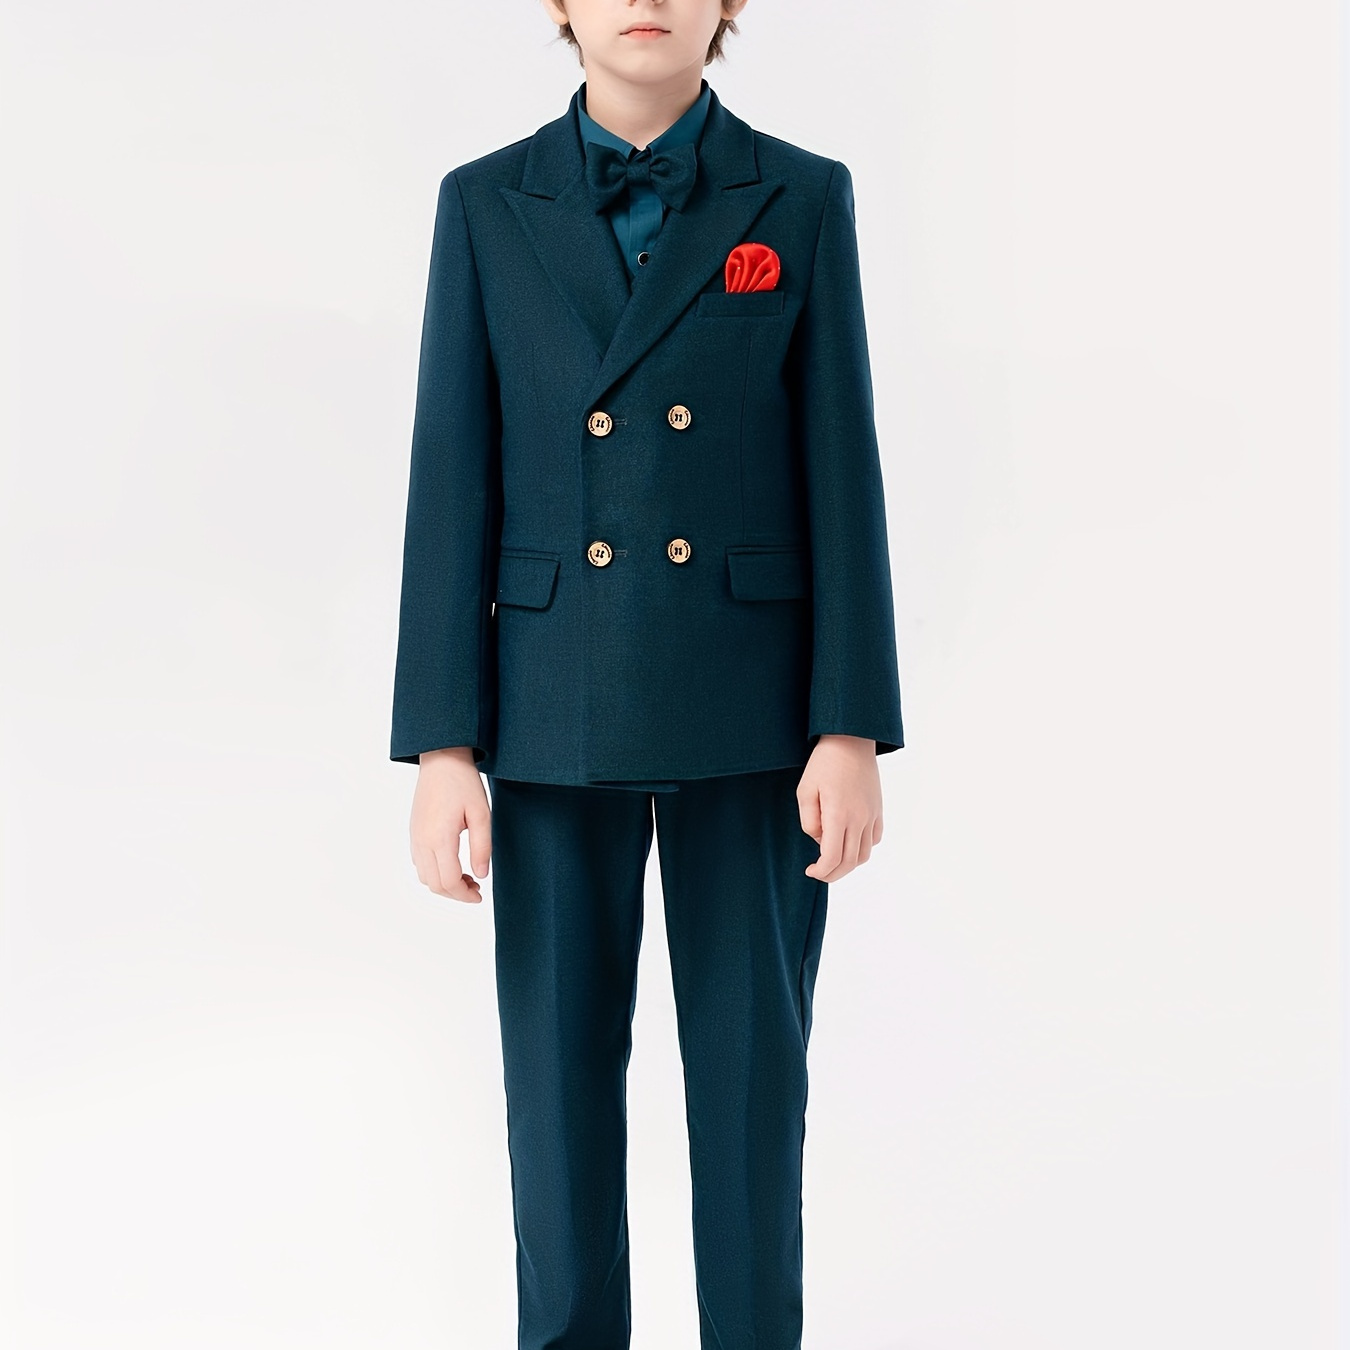 

Boys Formal Gentleman Outfits, Long Sleeve Blazer&bowtie Shirt&pants&vest, Boys Clothing Set For Competition Performance Wedding Banquet Dress